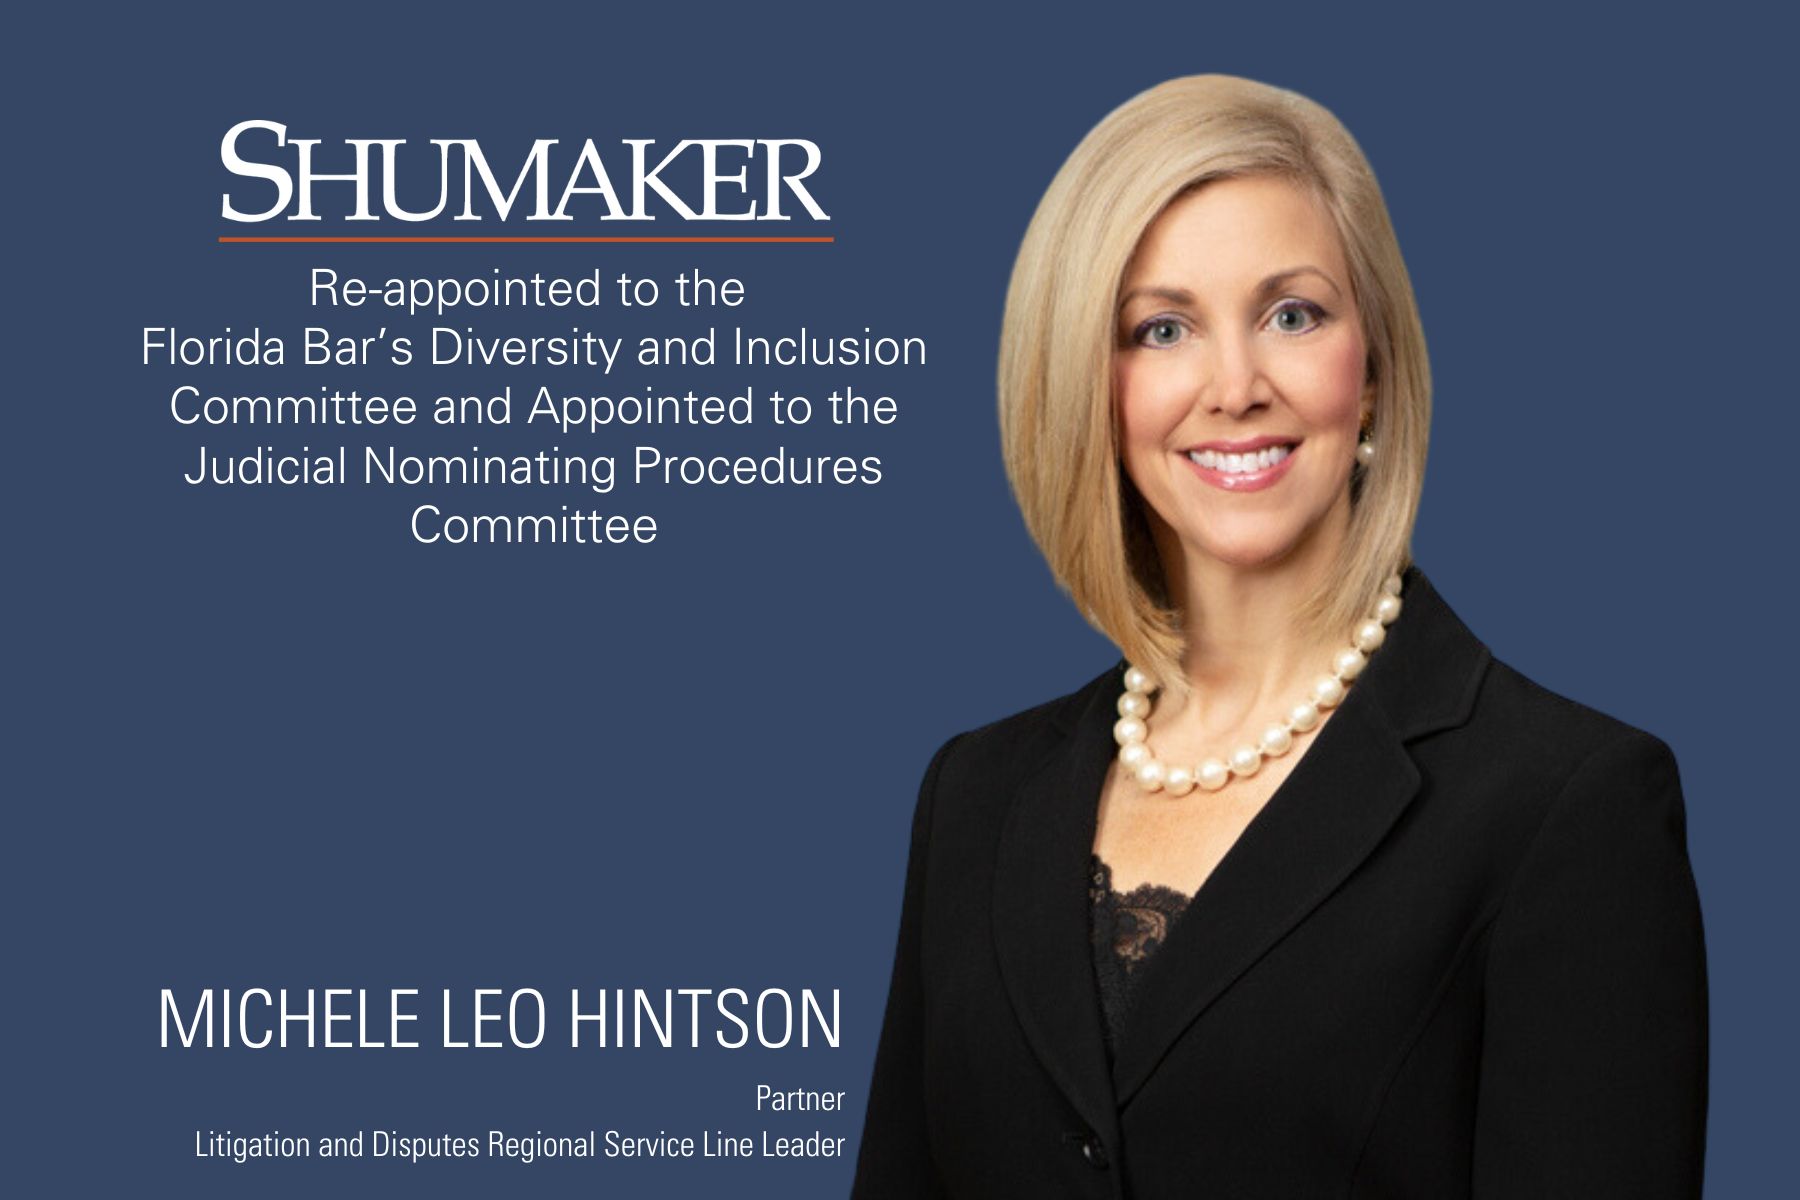 Shumaker’s Michele Leo Hintson Selected by the Florida Bar to Serve on Two Committees